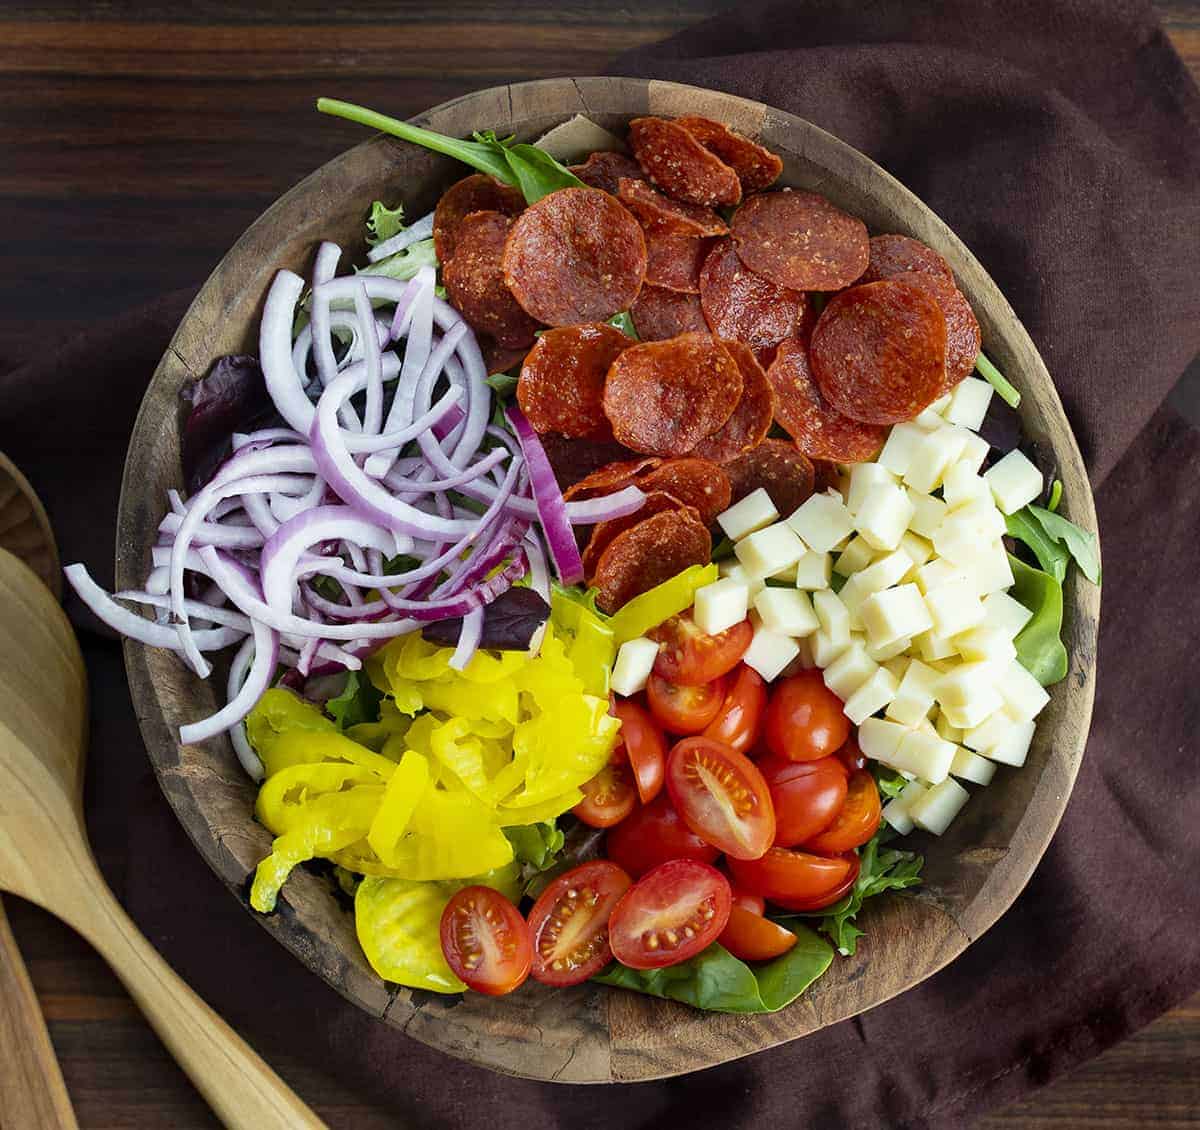 Ingredients for Pepperoni Salad